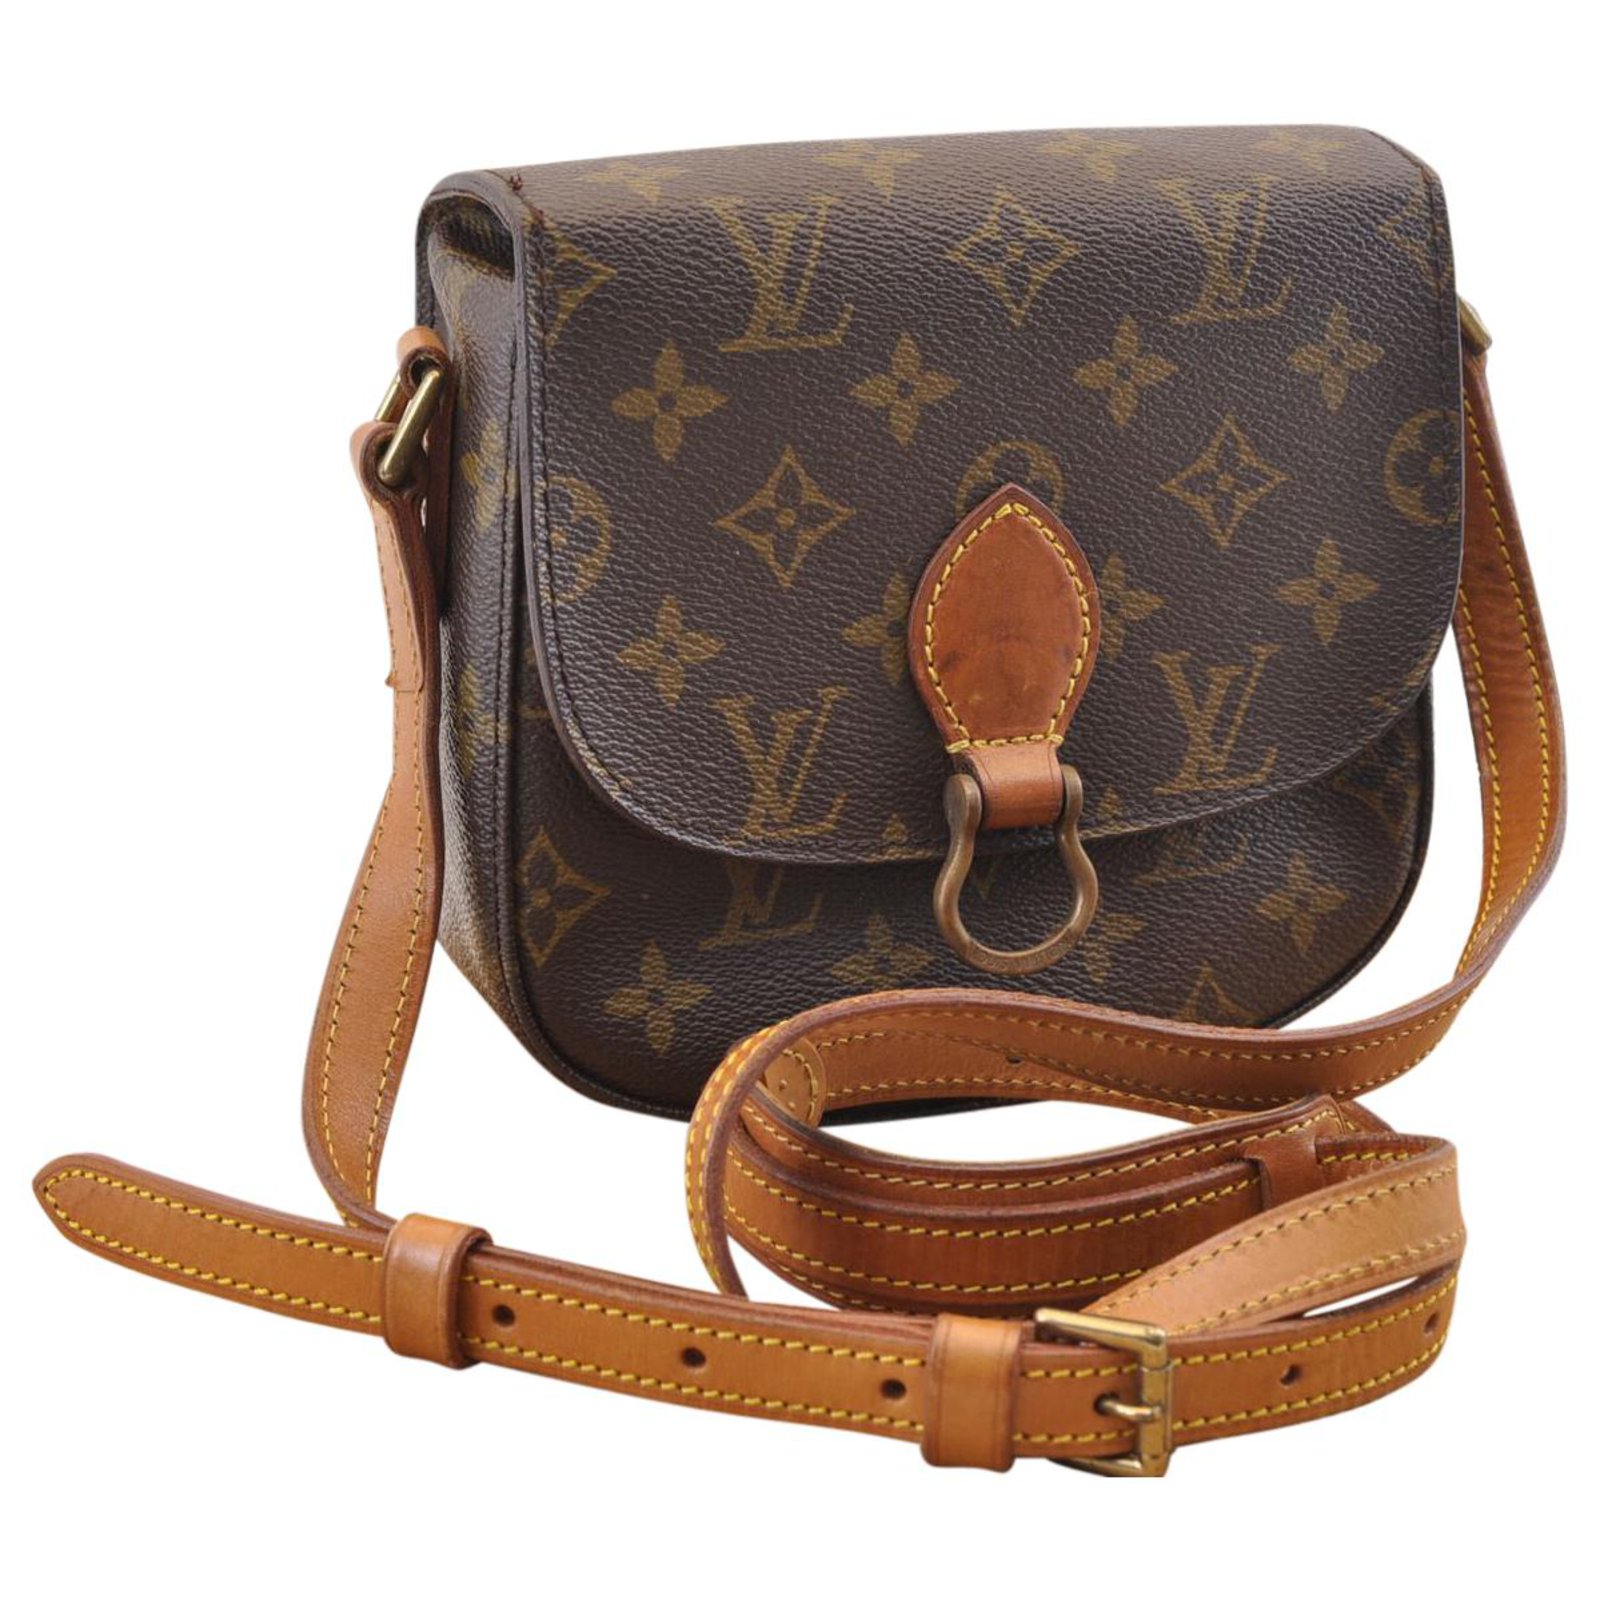 Three On Bachelor Monday This Louis Vuitton Saint Cloud Comes In Three  Sizes And Is The Perfect C Louis Vuitton Vuitton Handbags Louis Vuitton  Handbags  xn90absbknhbvgexnp1ai443